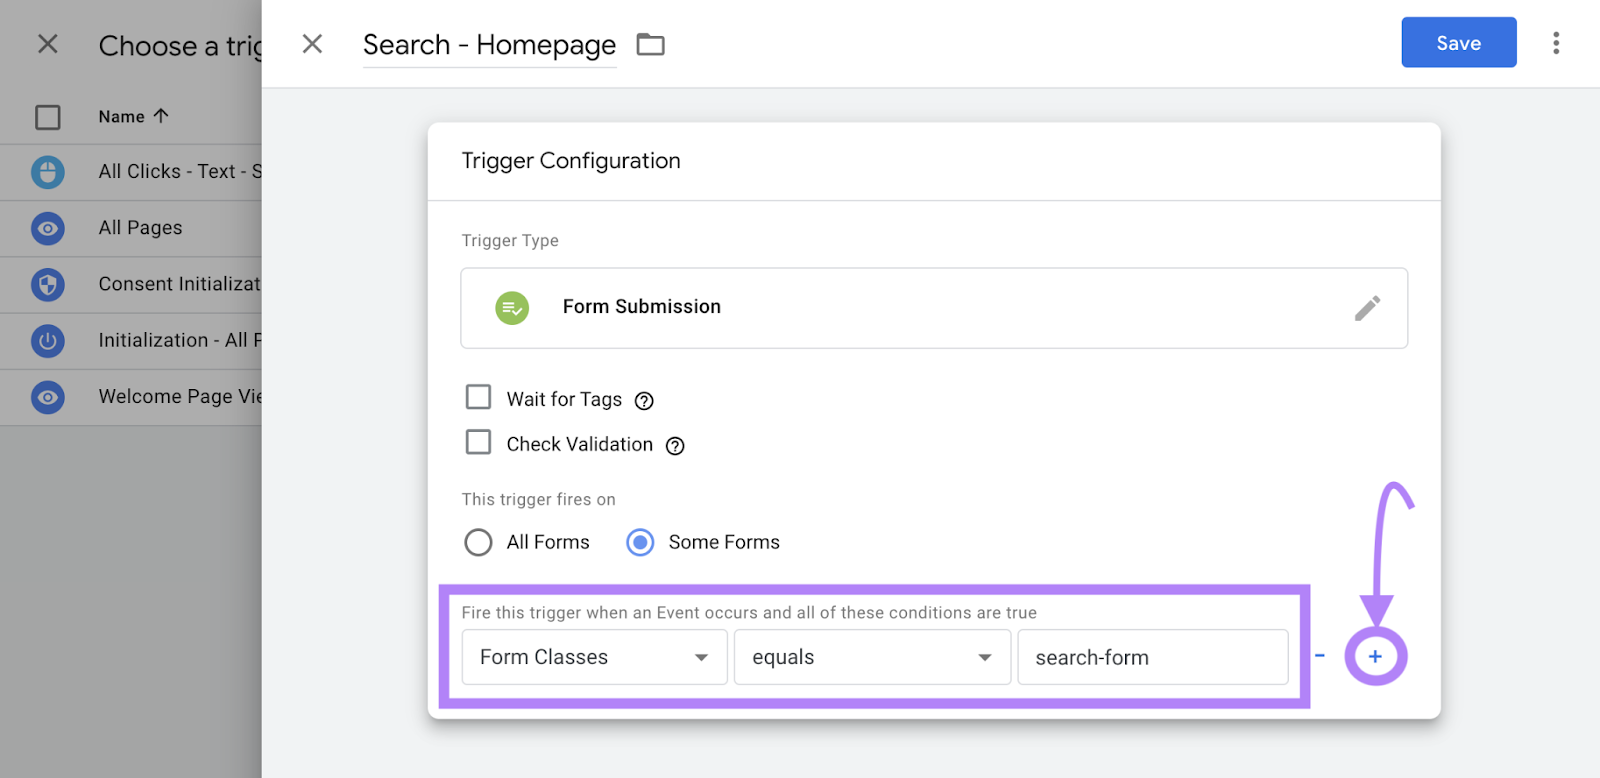 Adding "Form Classes" equals "search-form" trigger